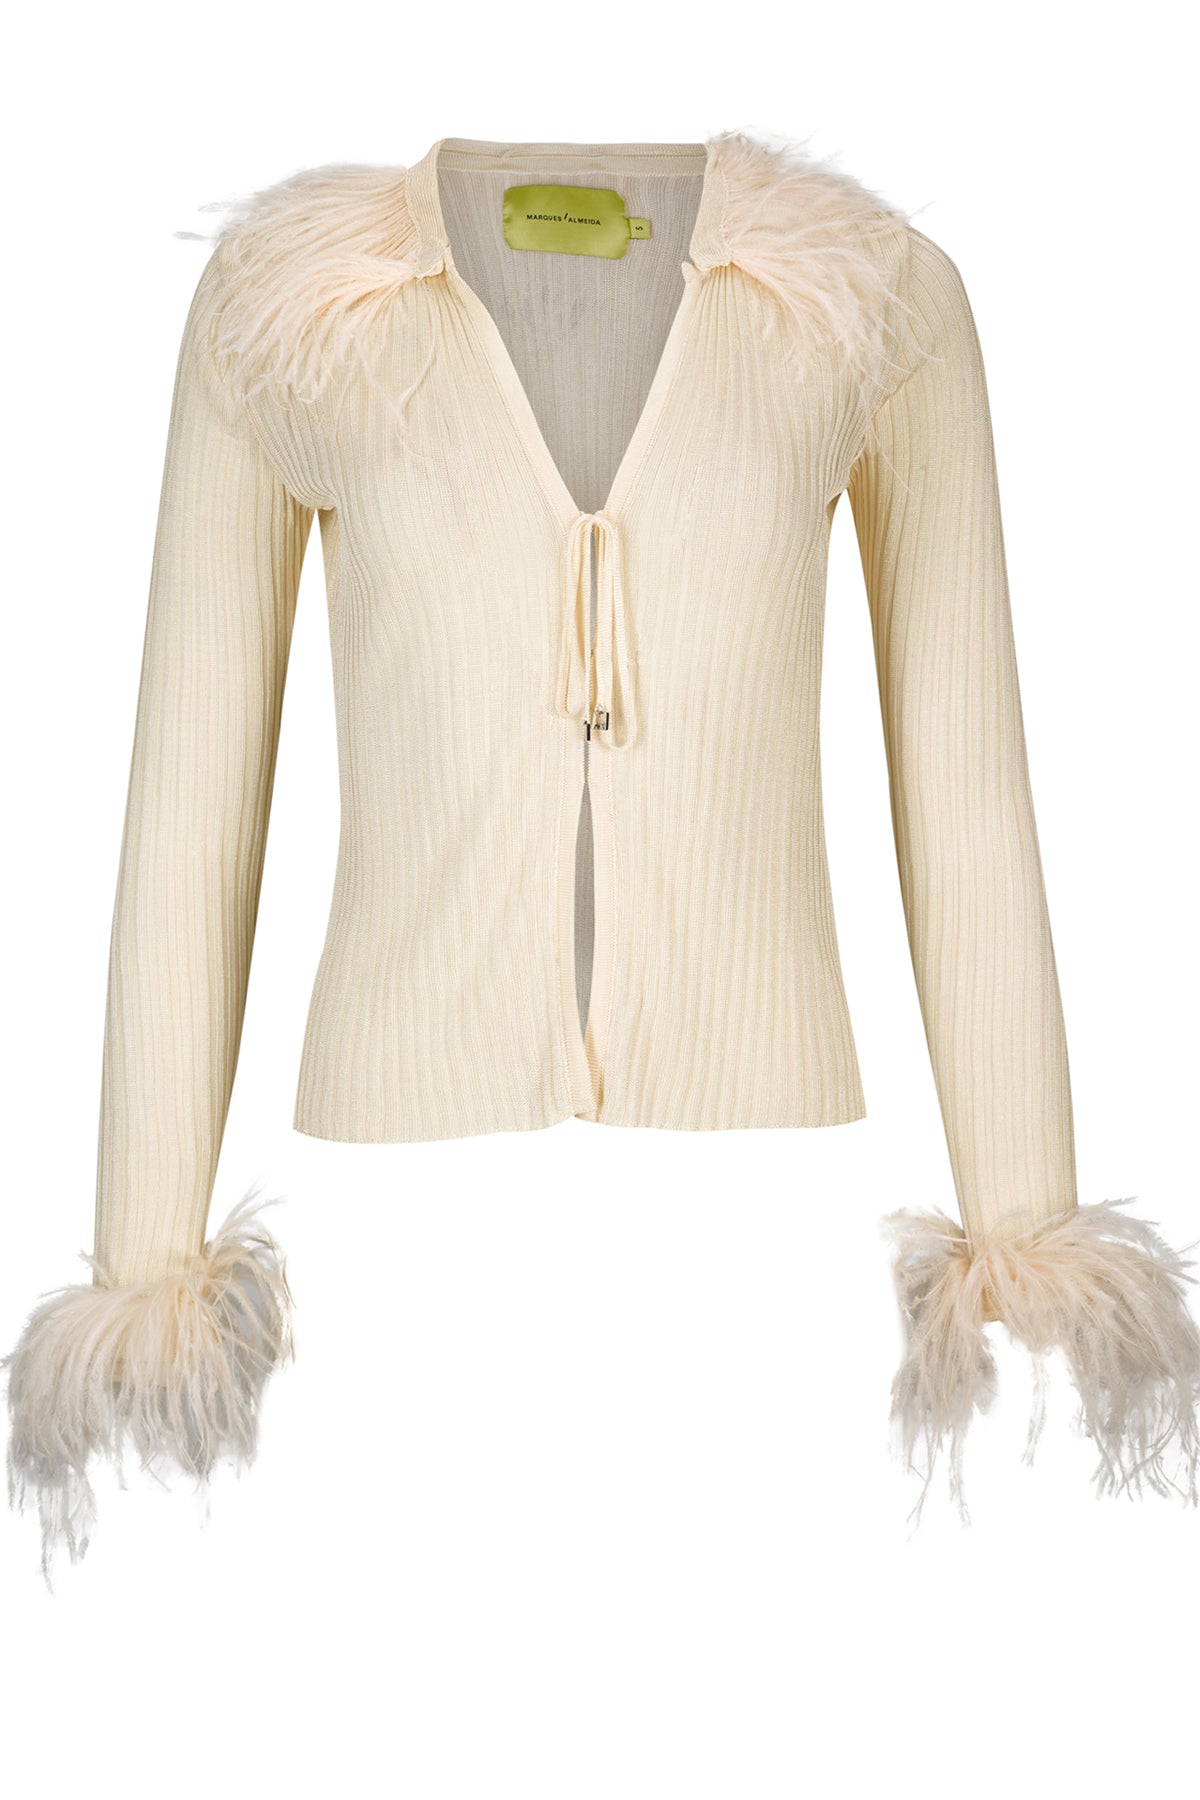 OFF WHITE VISCOSE KNITTED TOP WITH FEATHERS marques almeida